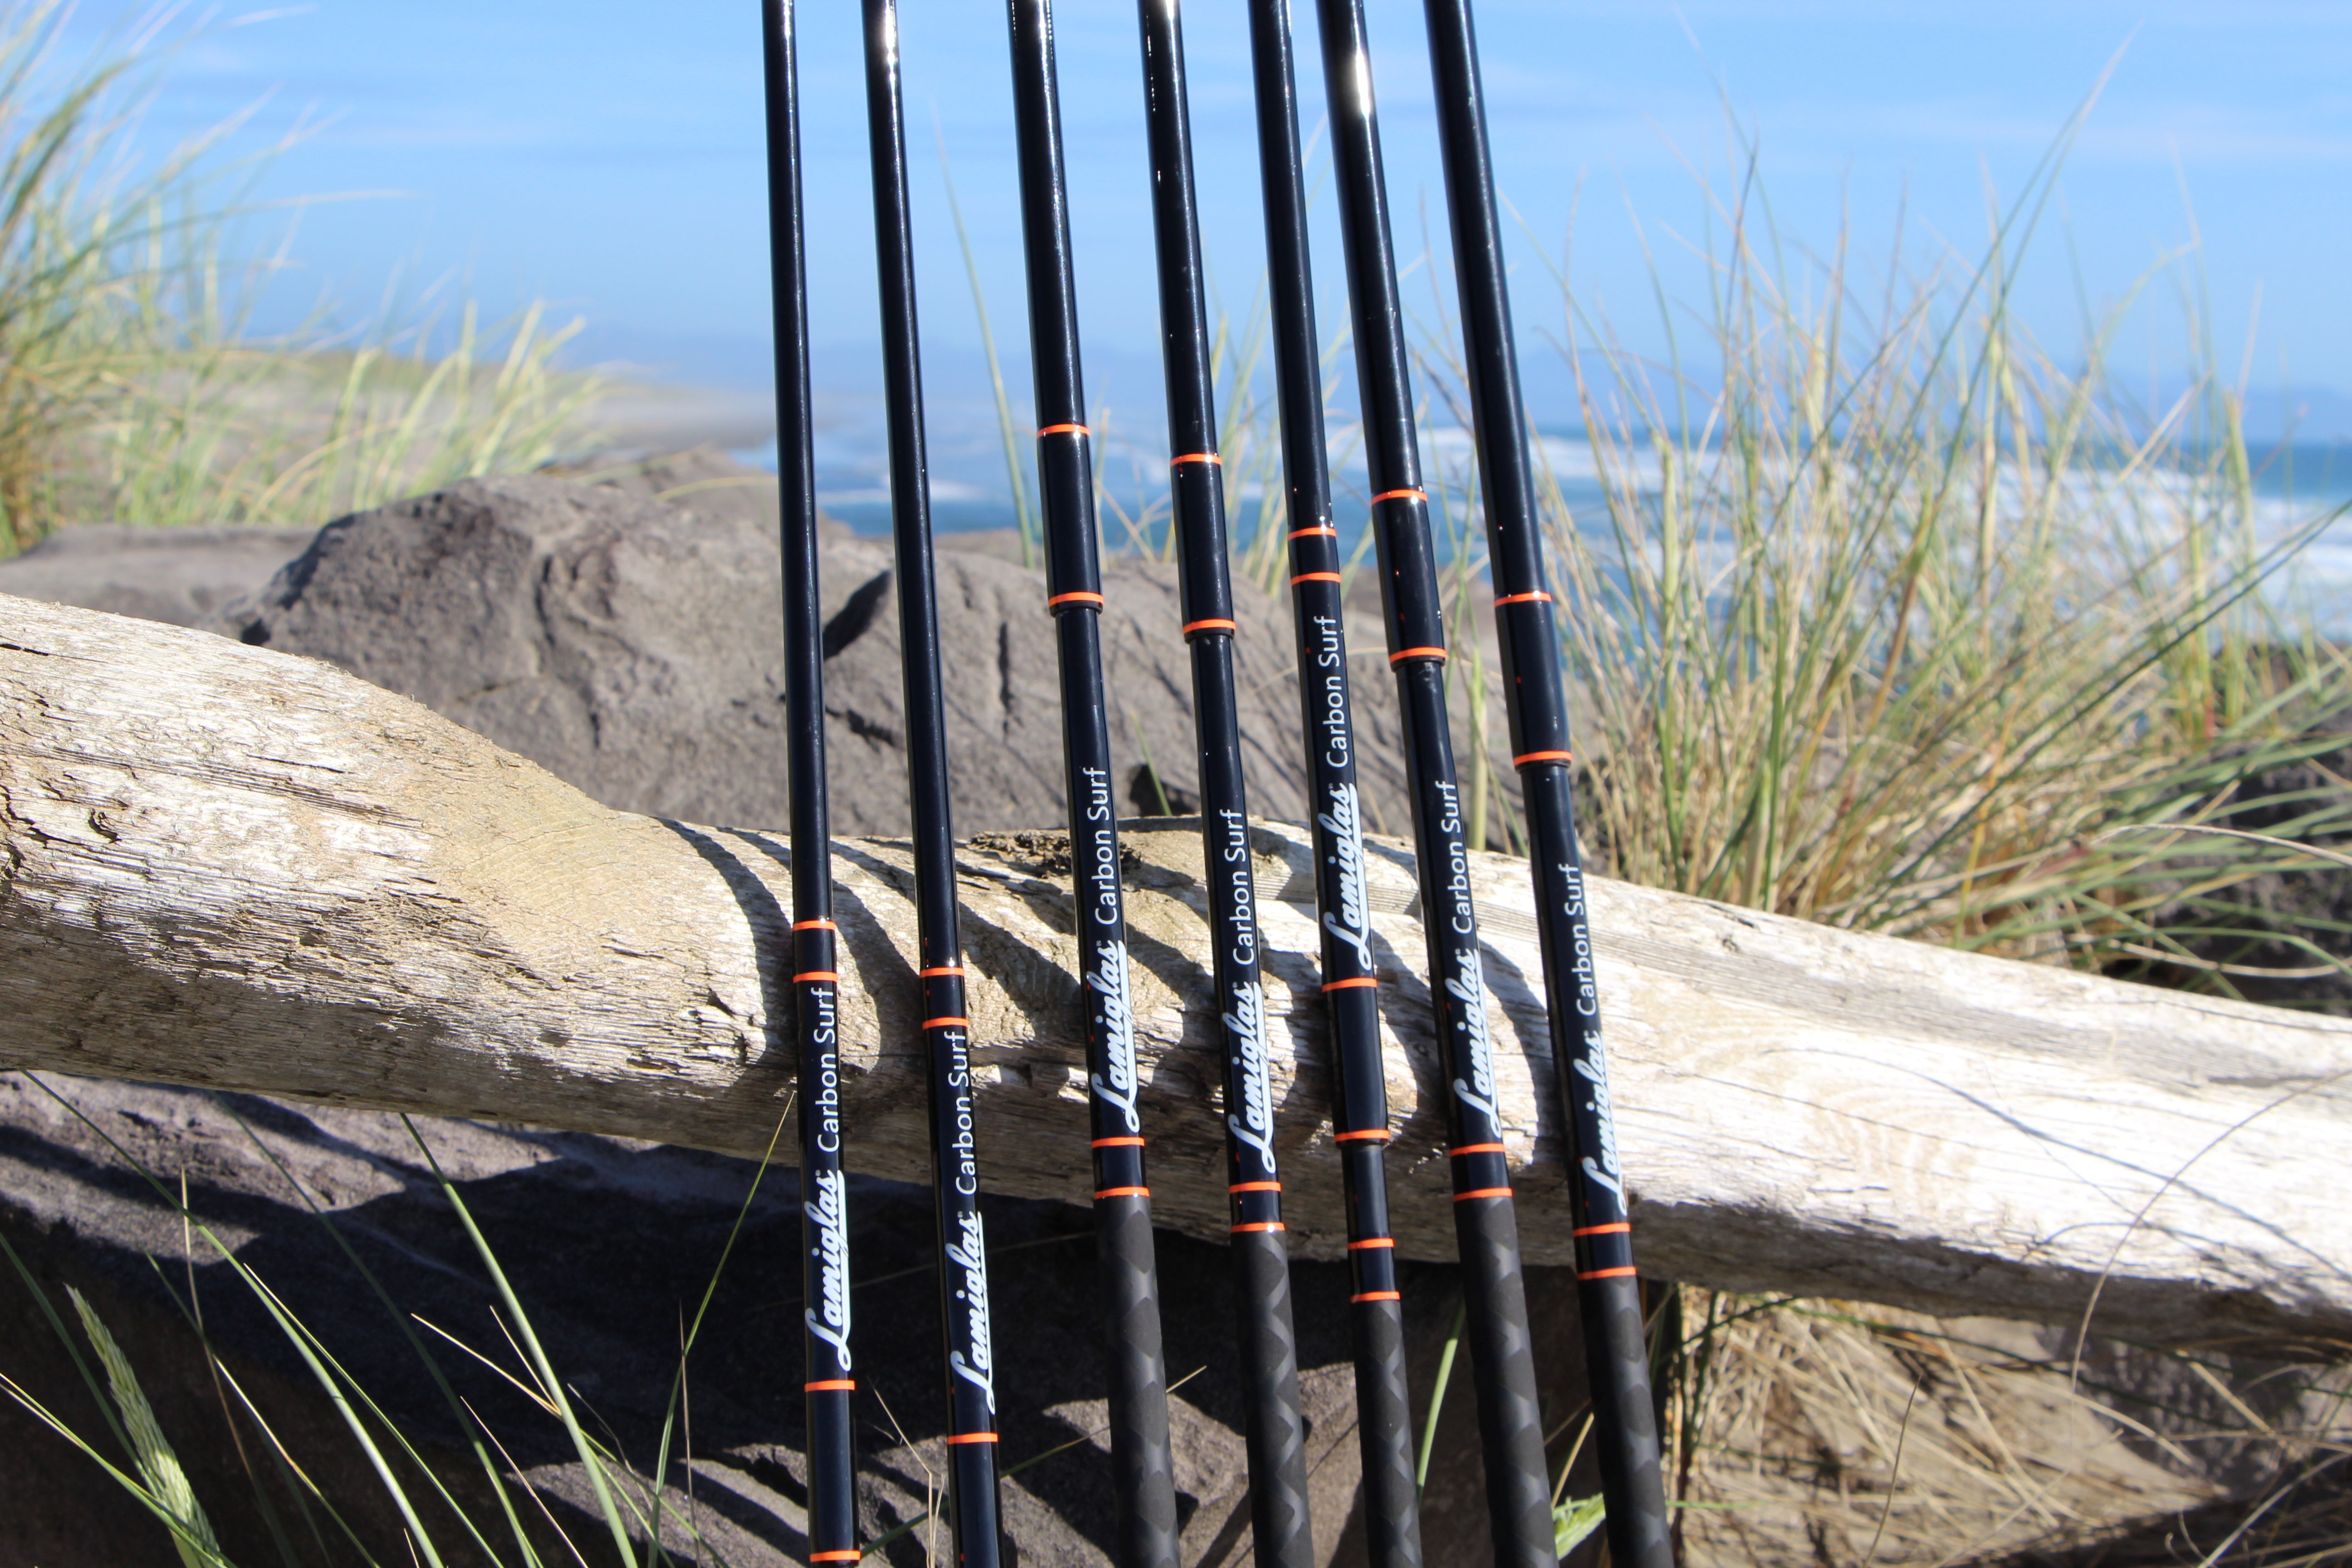 All Saltwater Fishing Rods & Poles 11 ft Item 2 for sale